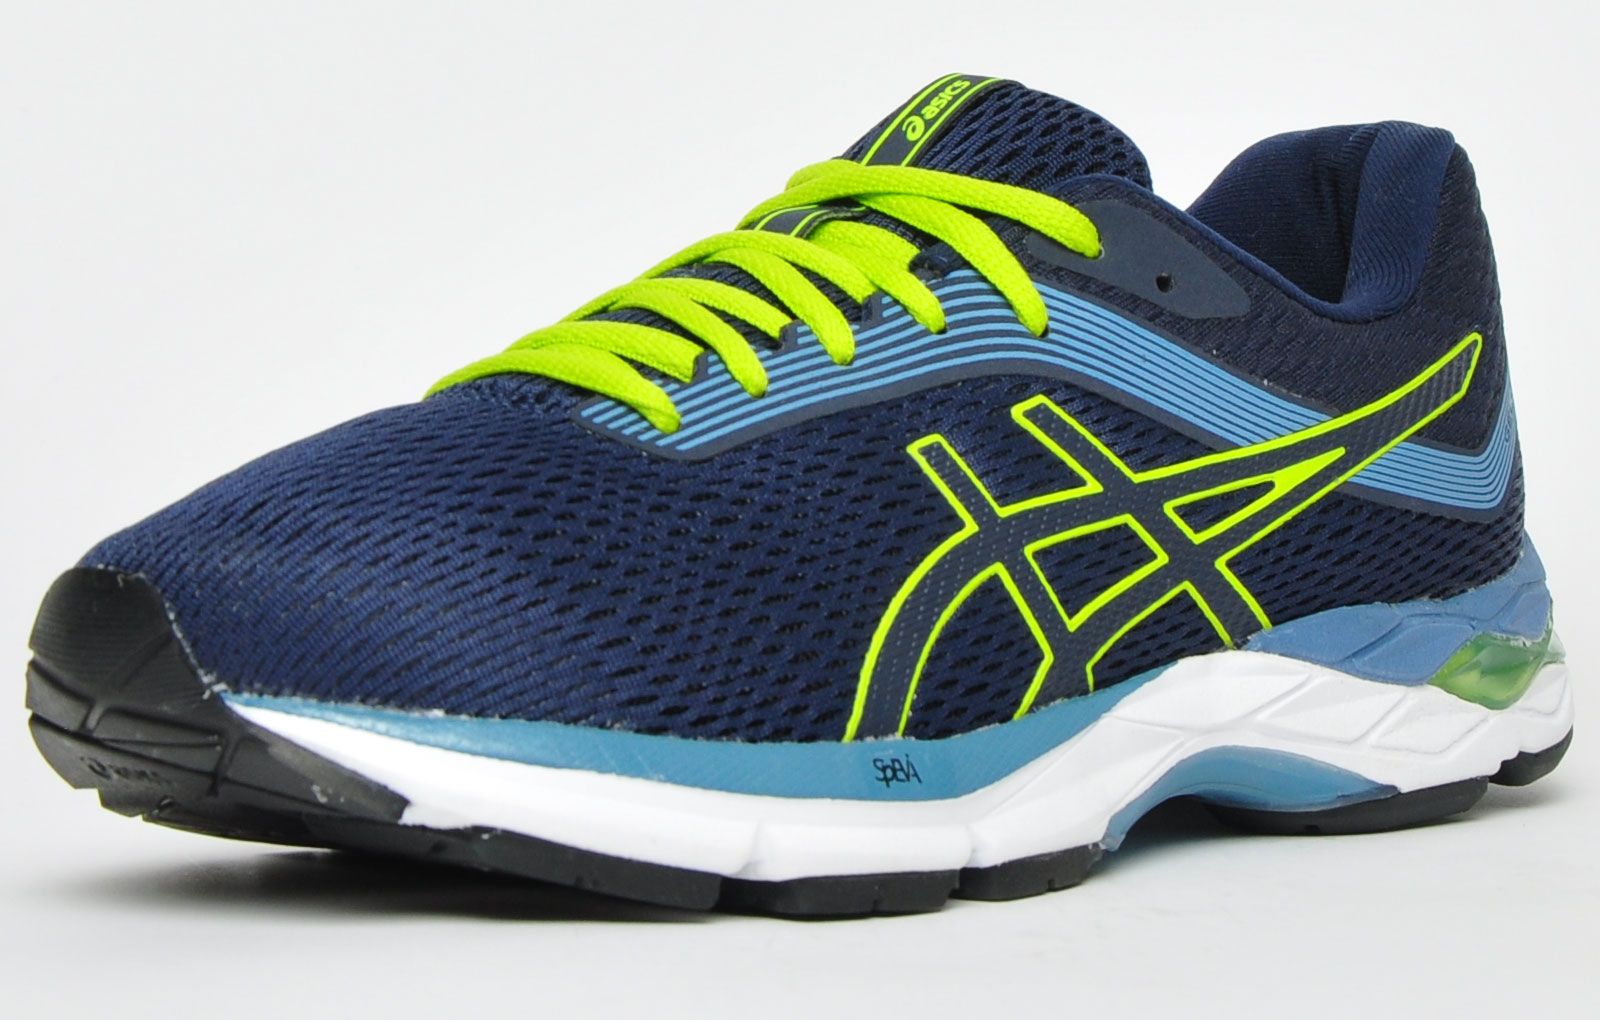 asics gel zone 4 review